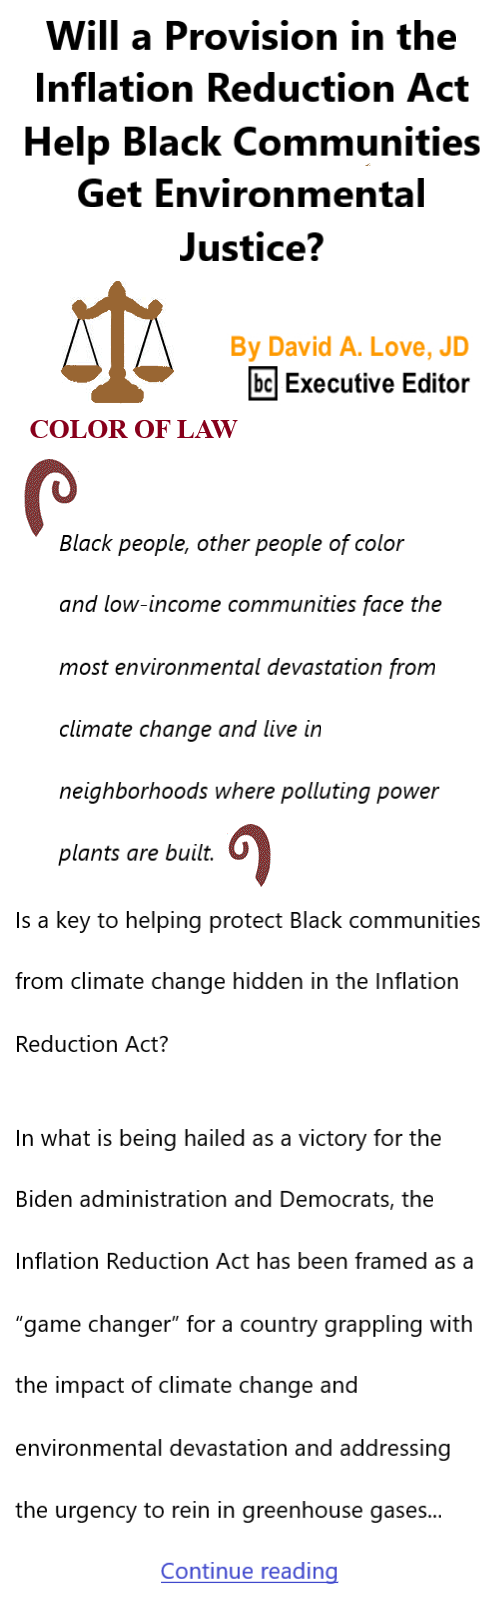 BlackCommentator.com Issue 935: Will a Provision in the Inflation Reduction Act Help Black Communities Get Environmental Justice? - Color of Law By David A. Love, JD, BC Executive Editor